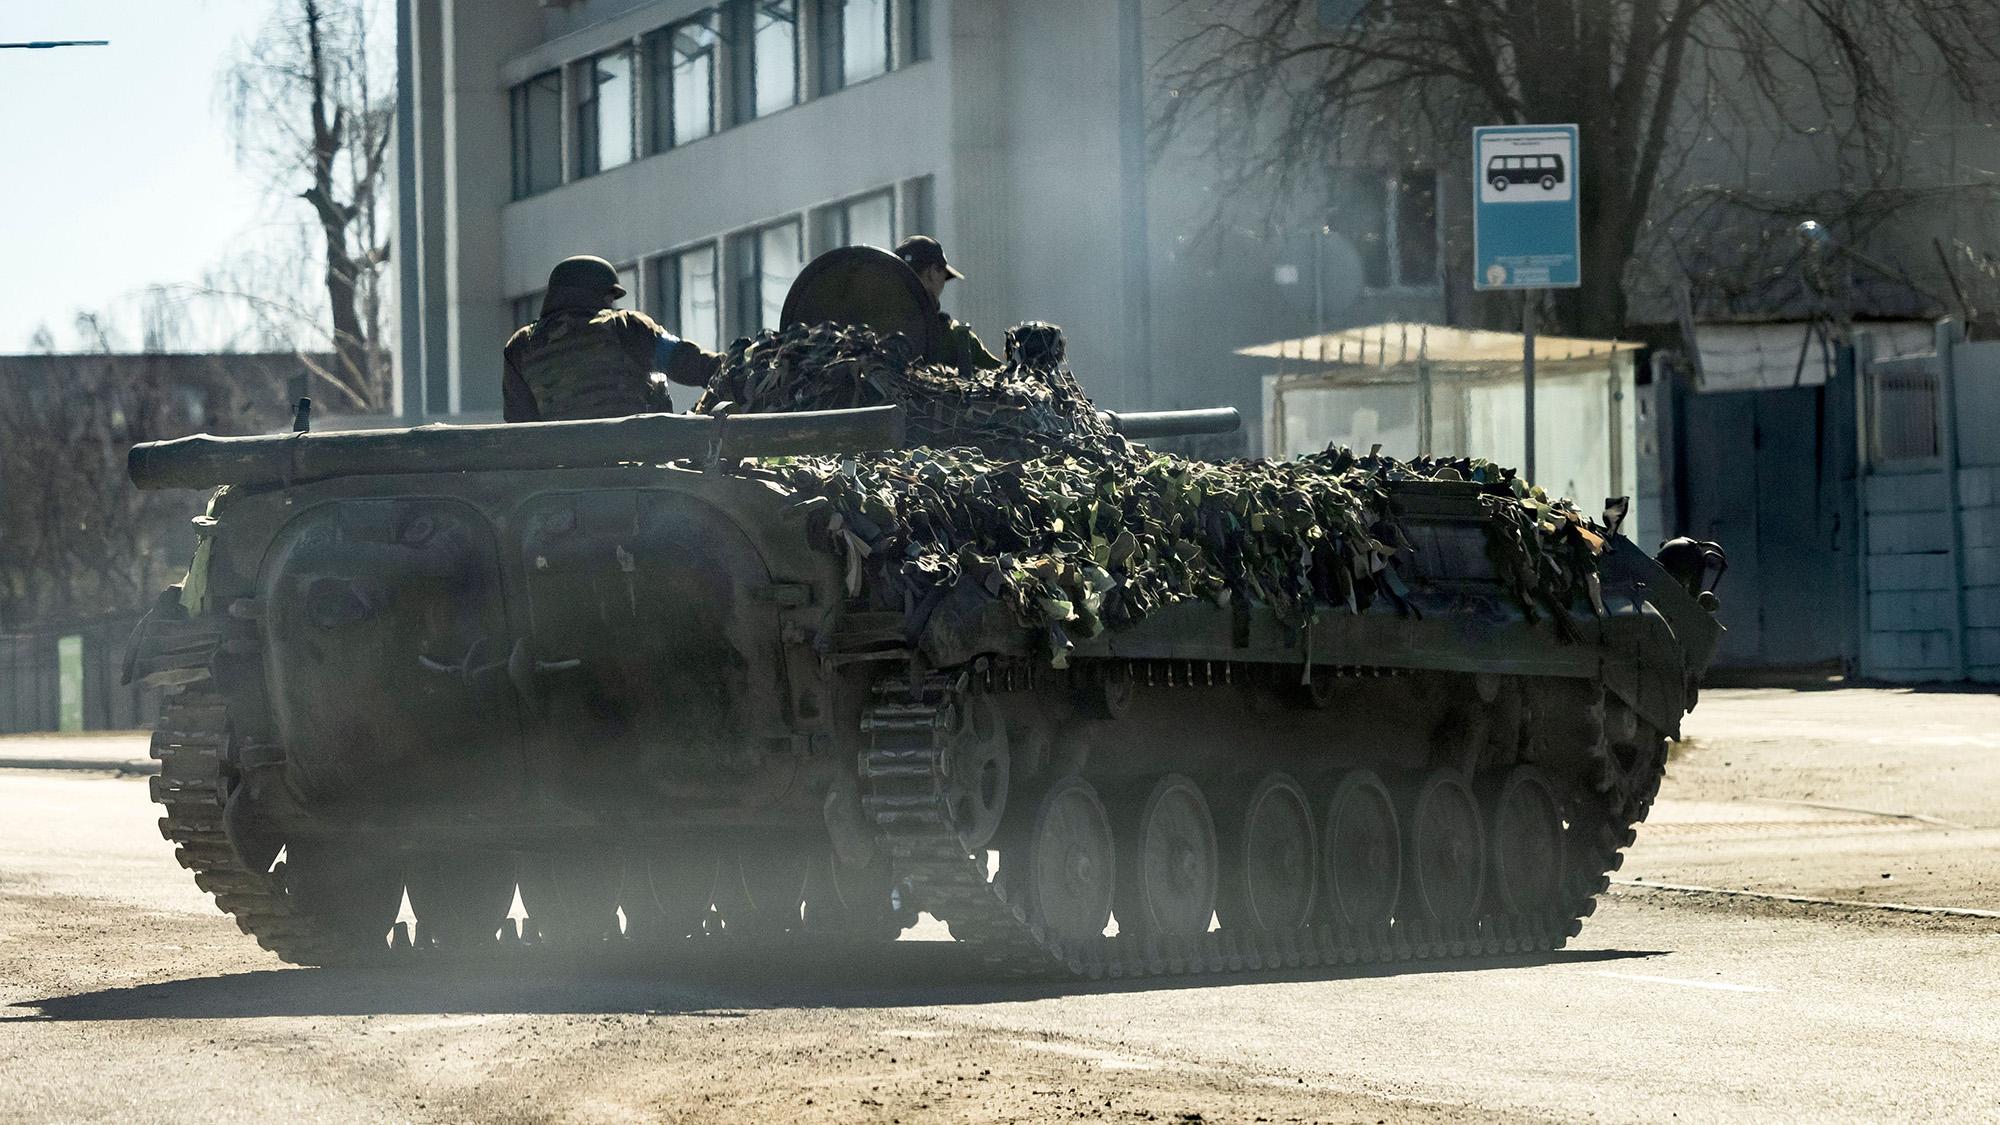 A Ukrainian armored military vehicle is seen on a road in Kyiv, on March 22.